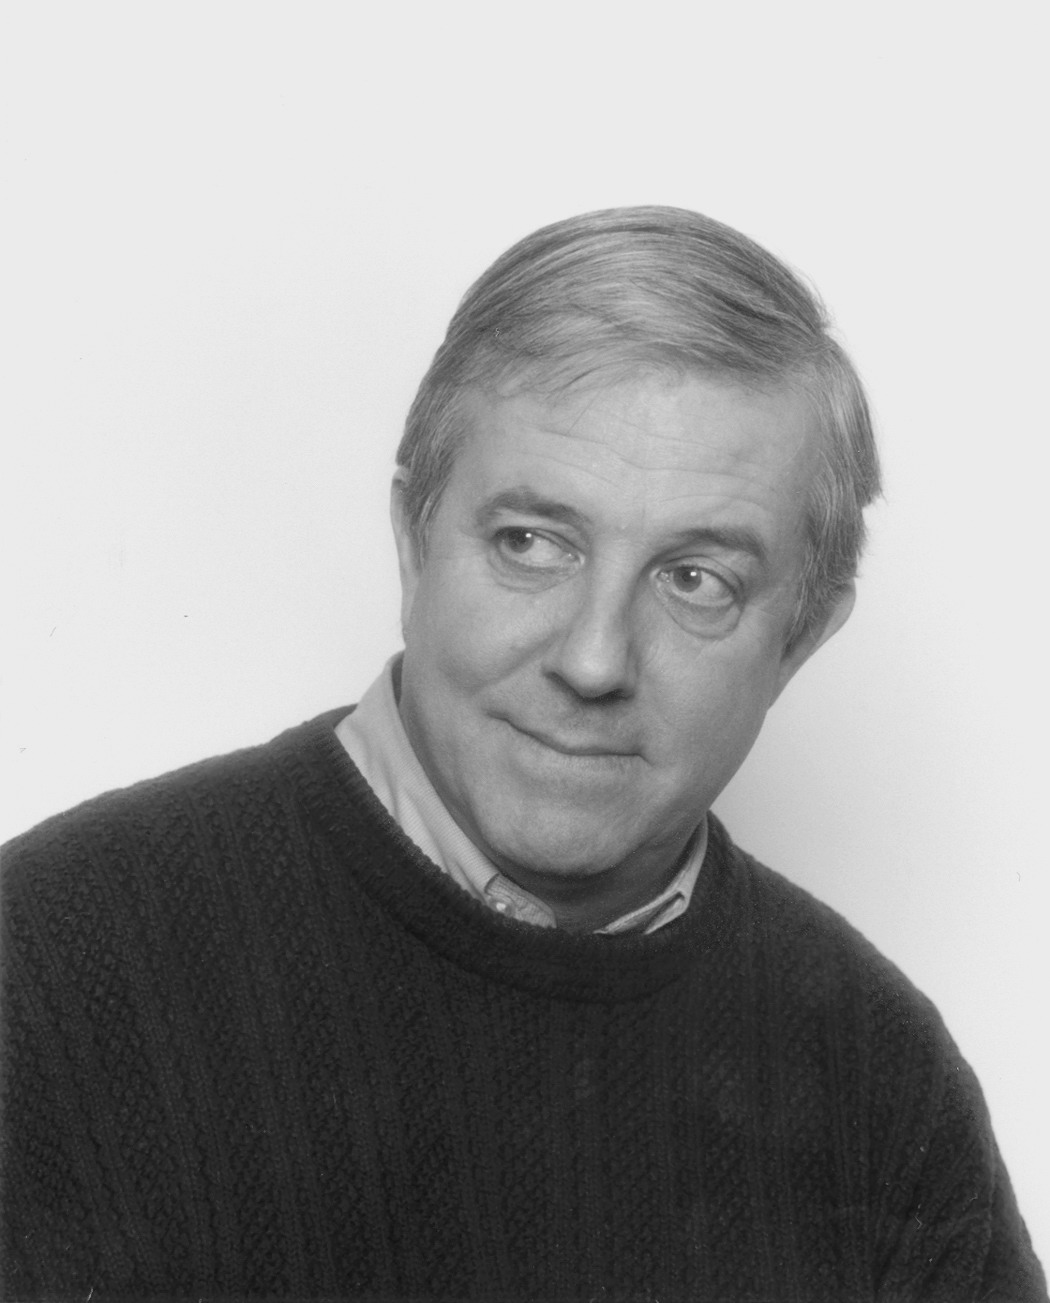 a black and white image of Mark Frutkin in a sweater and collard shirt, looking off to the side.